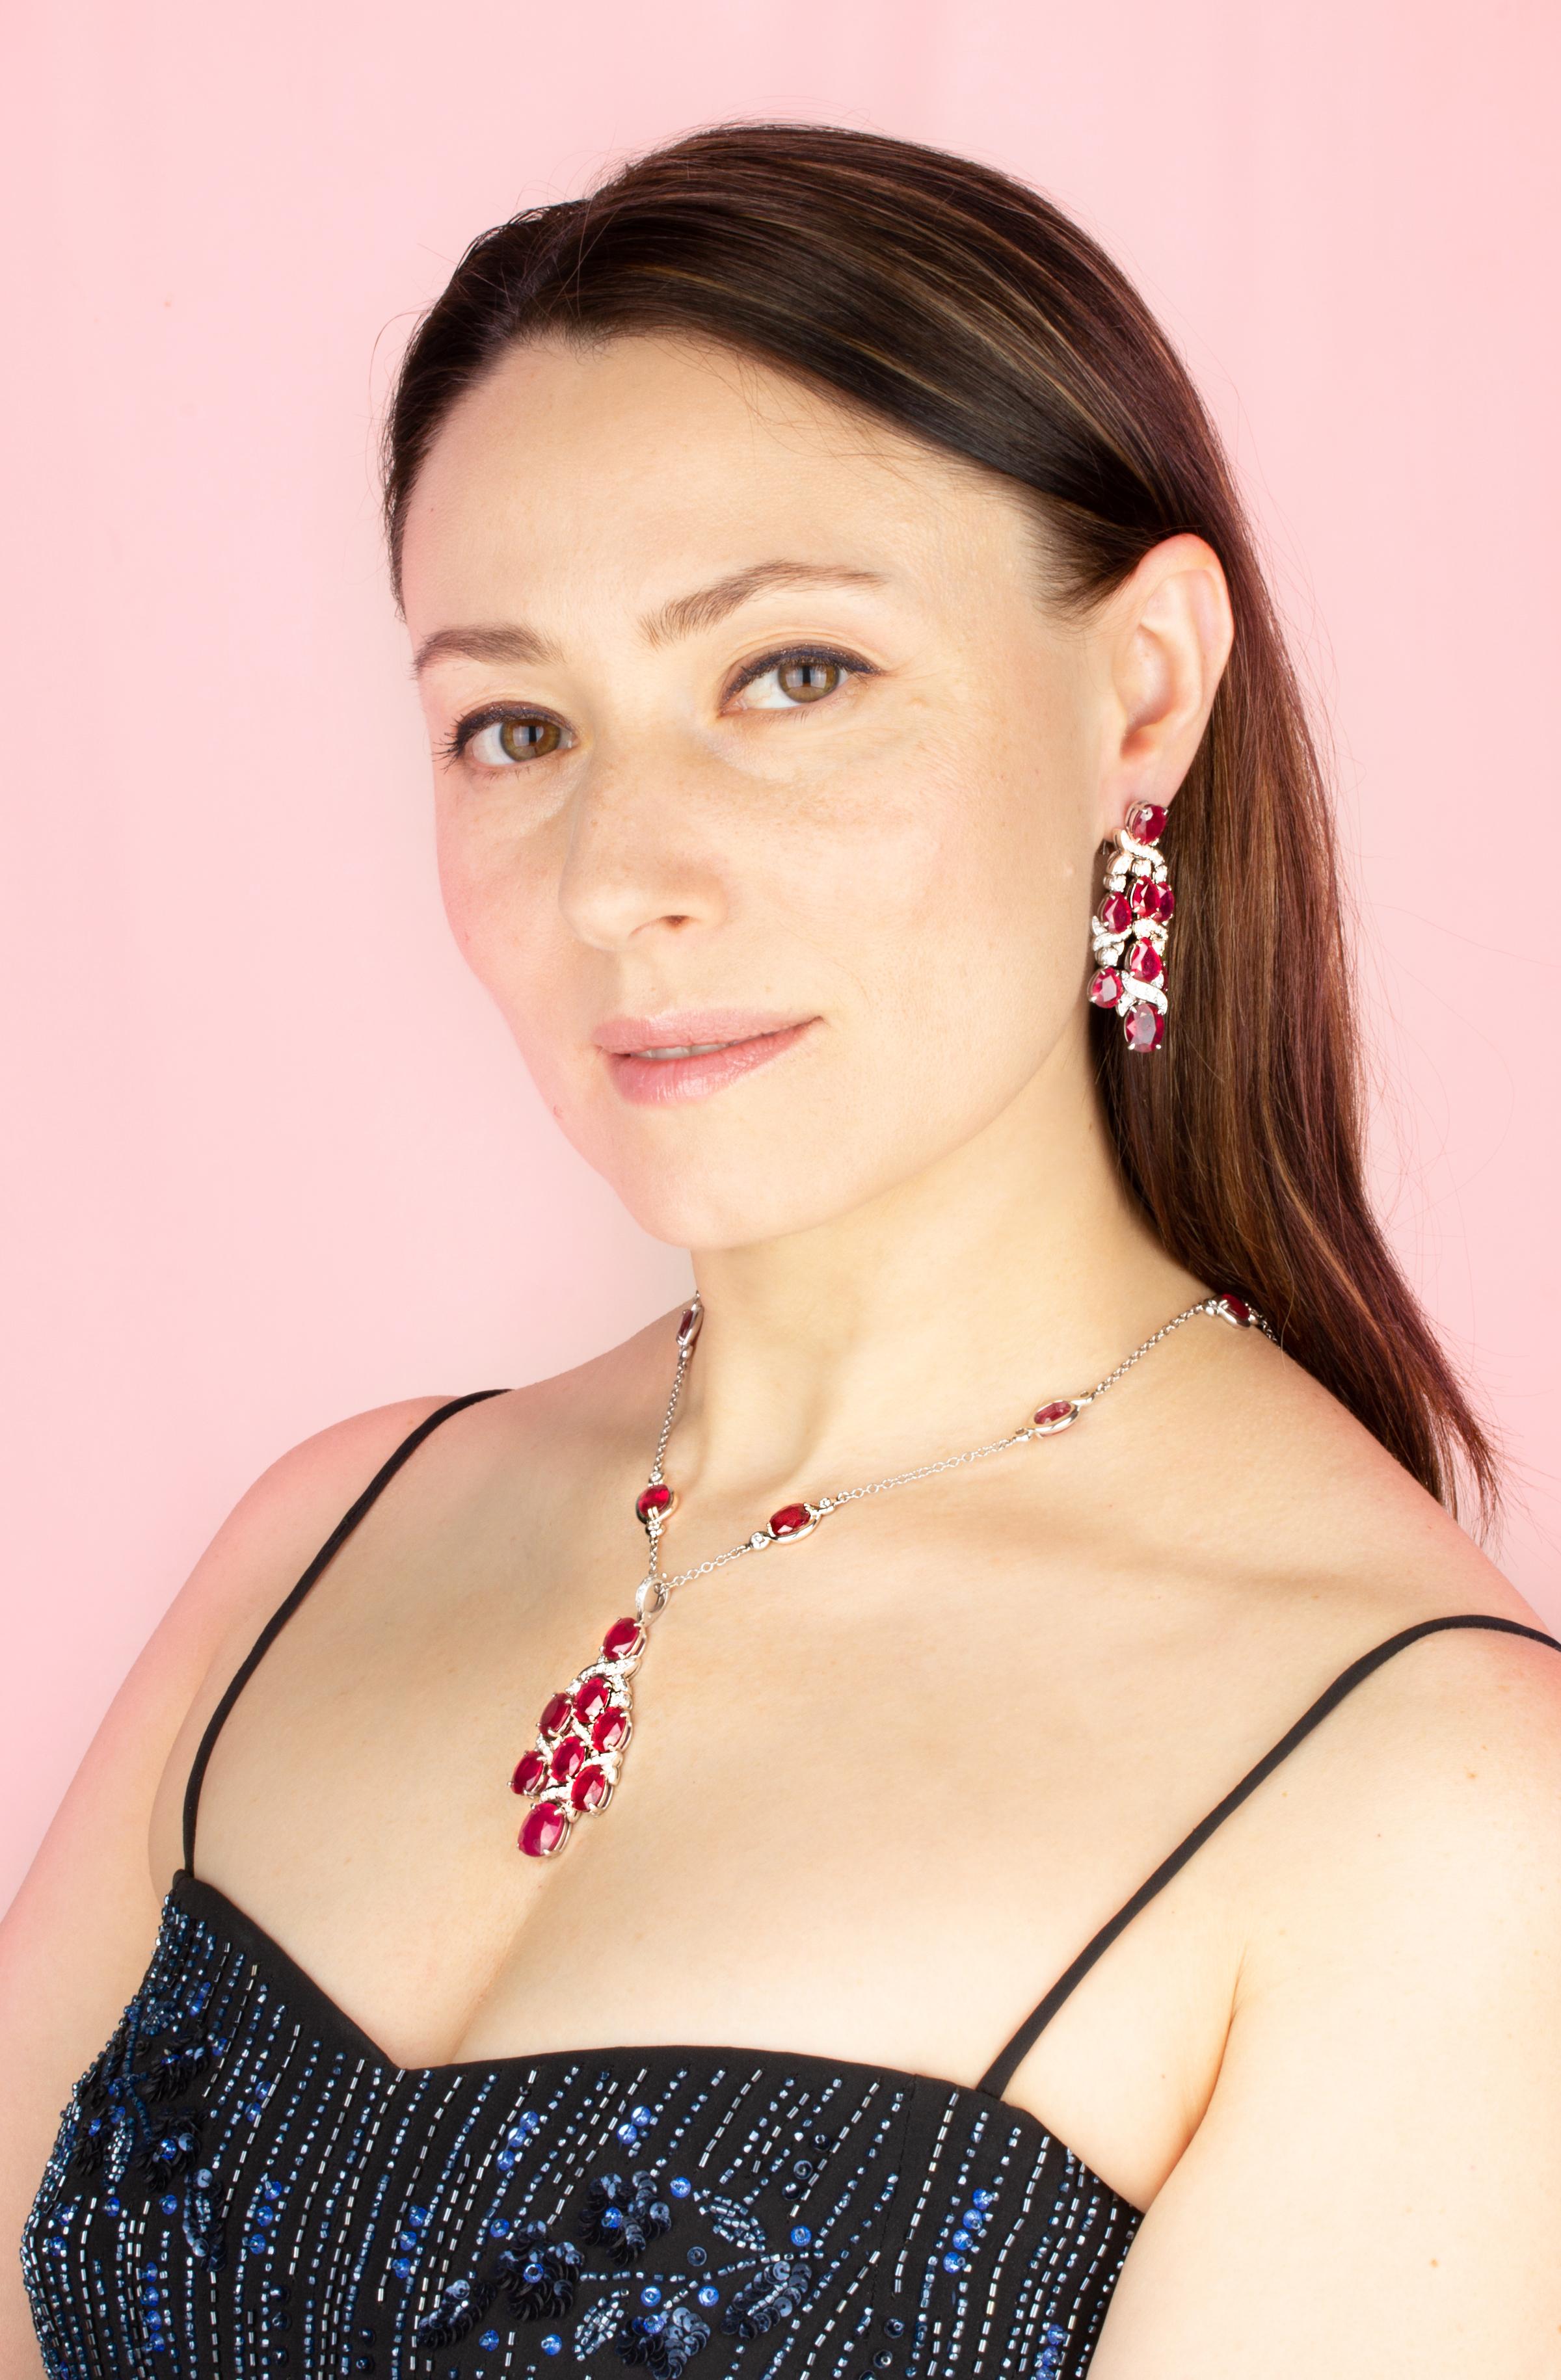 The chandelier ruby and diamond necklace and earrings set is constituted by faceted heated rubies of homogeneously brilliant quality, especially cut from larger Mozambique rough to obtain the sizes as necessary for the design. The total weight of